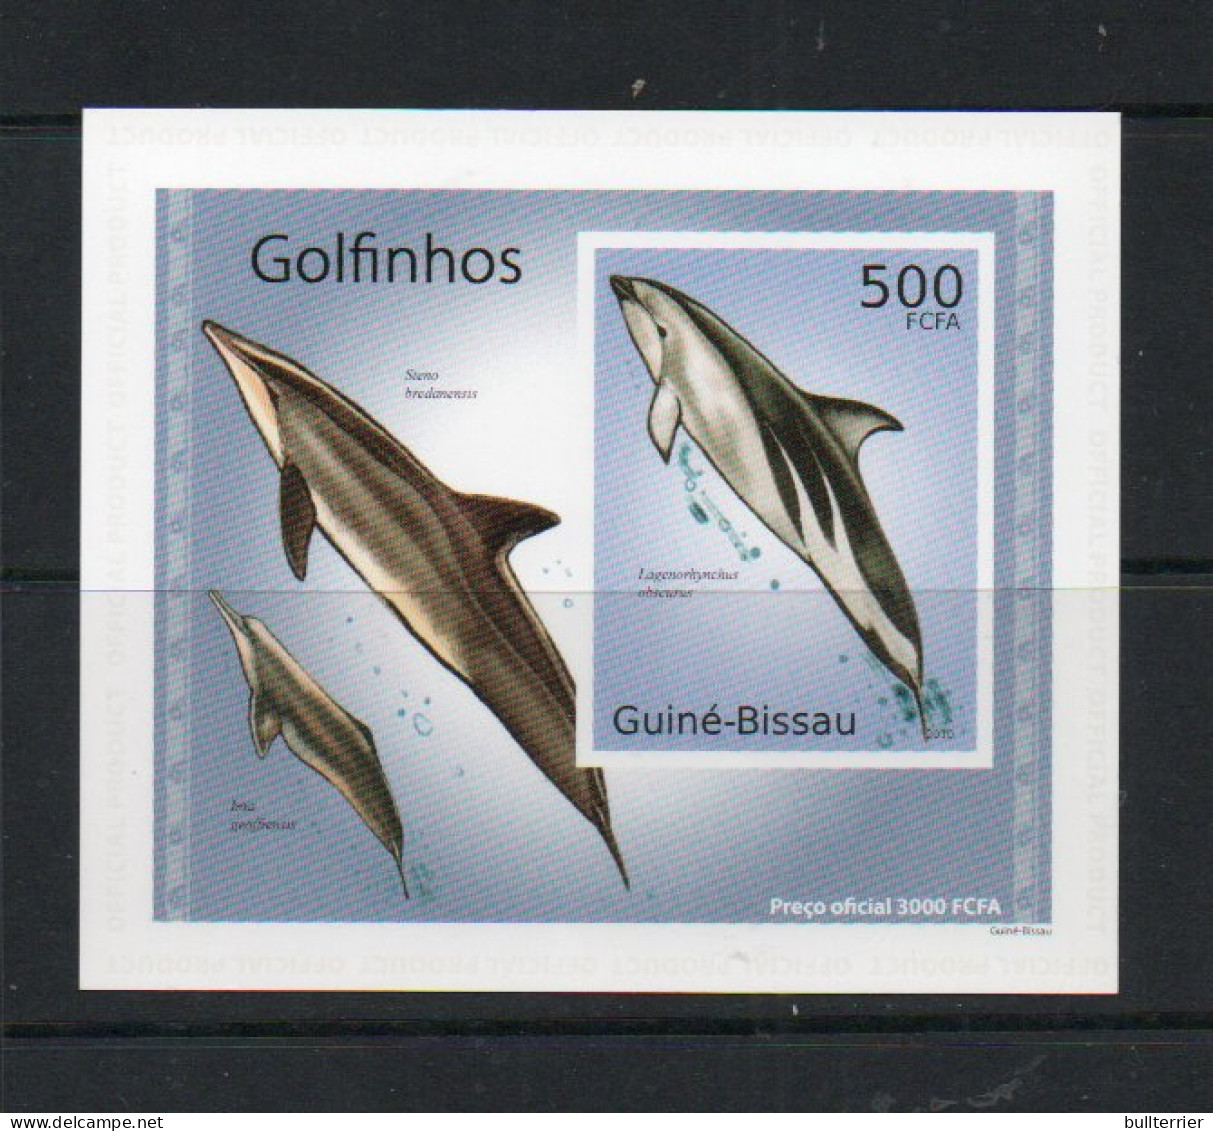 DOLPHINS - GUINEA BISSAU - LAGEENORHYNCHUS OBSCURUS PROOF CARD UNUSED  - Dolphins